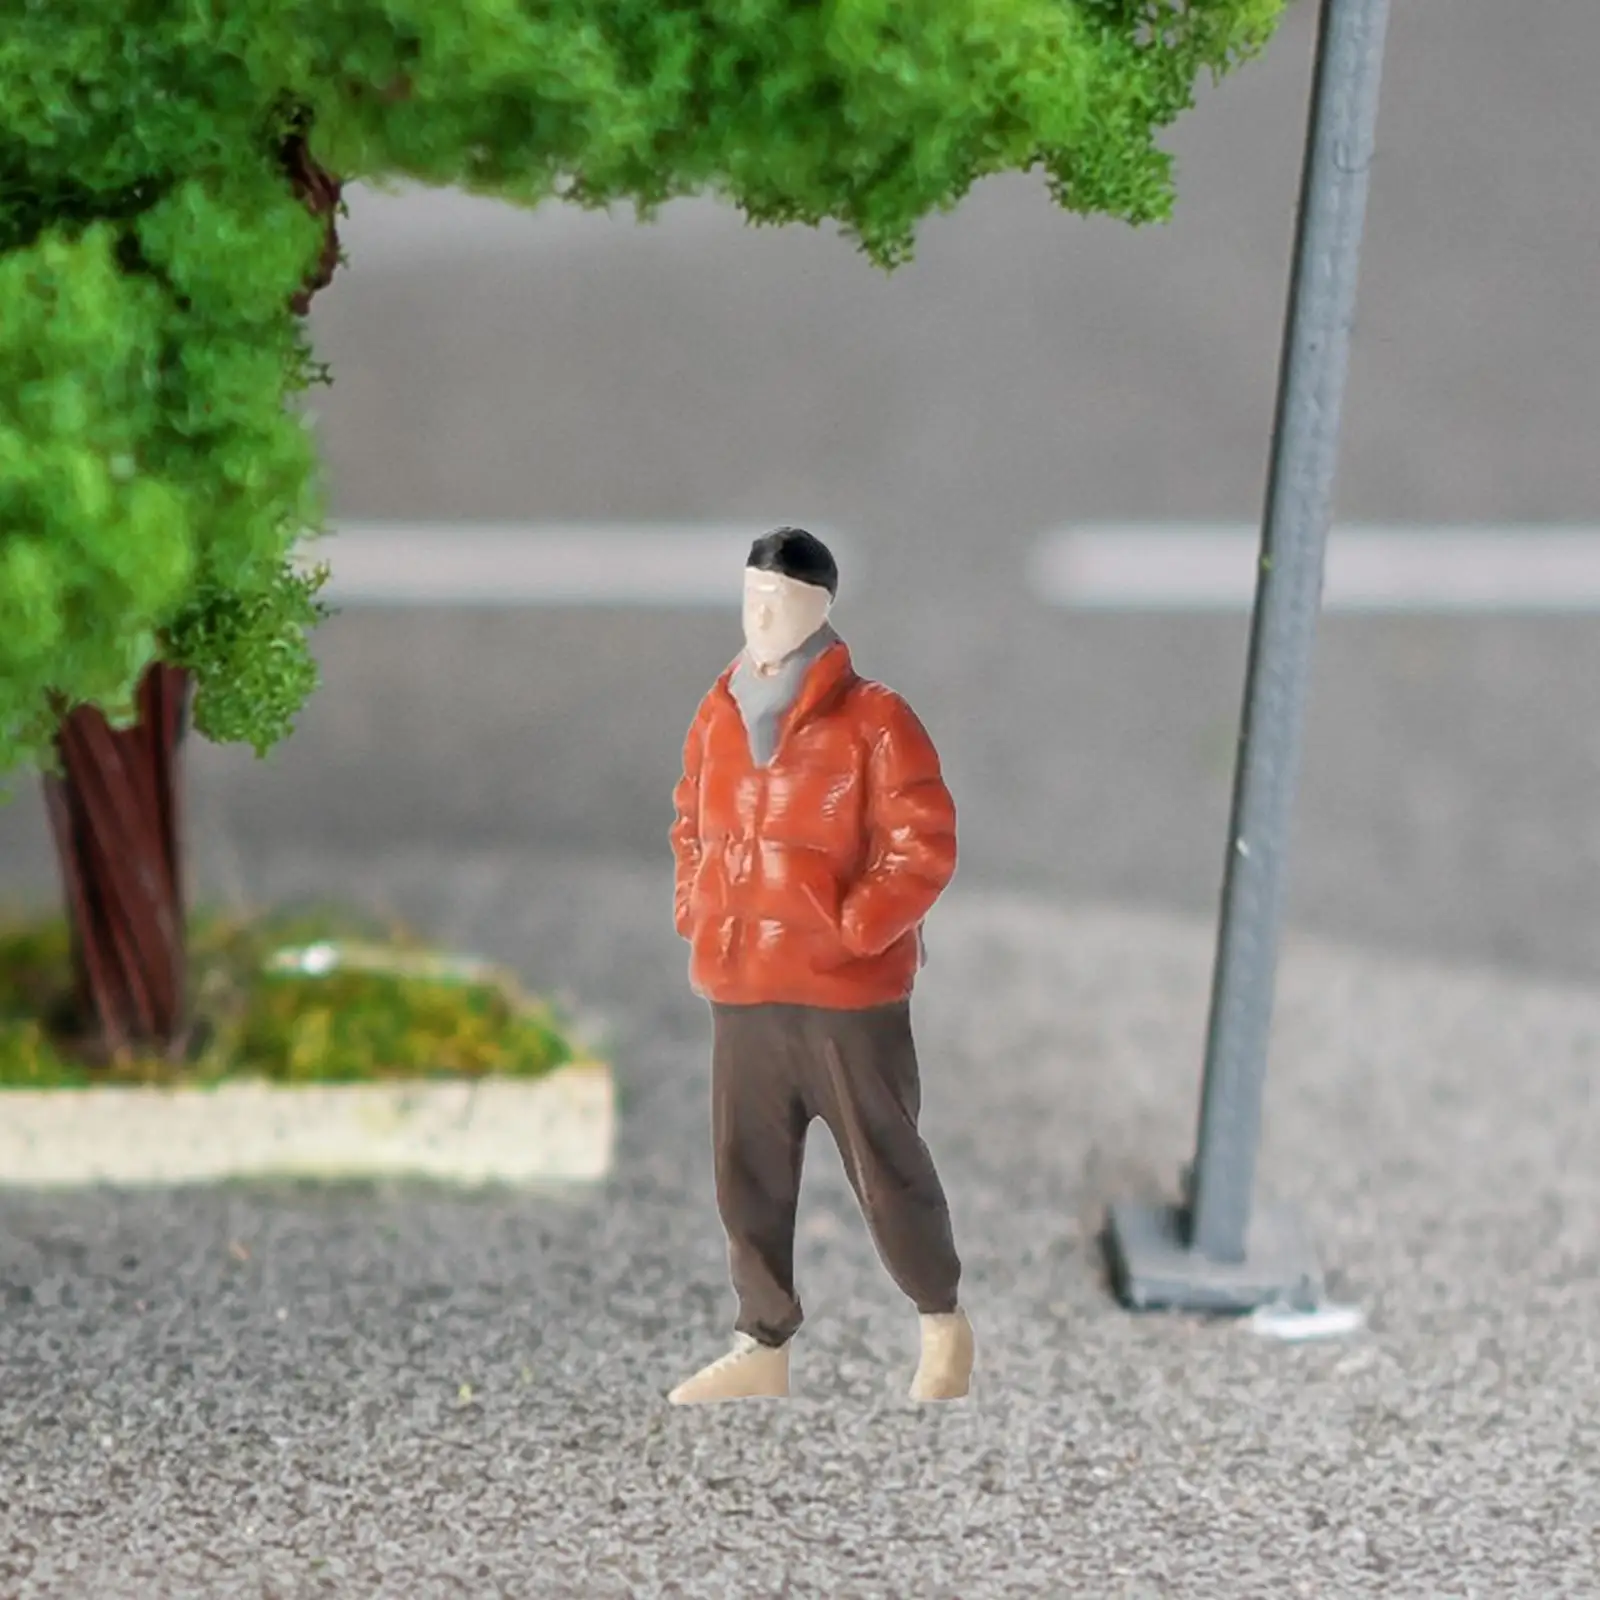 Hand Painted 1/64 Men Figures Dioramas Miniature Scenes S Scale People Model Layout DIY Projects Fairy Garden Decoration